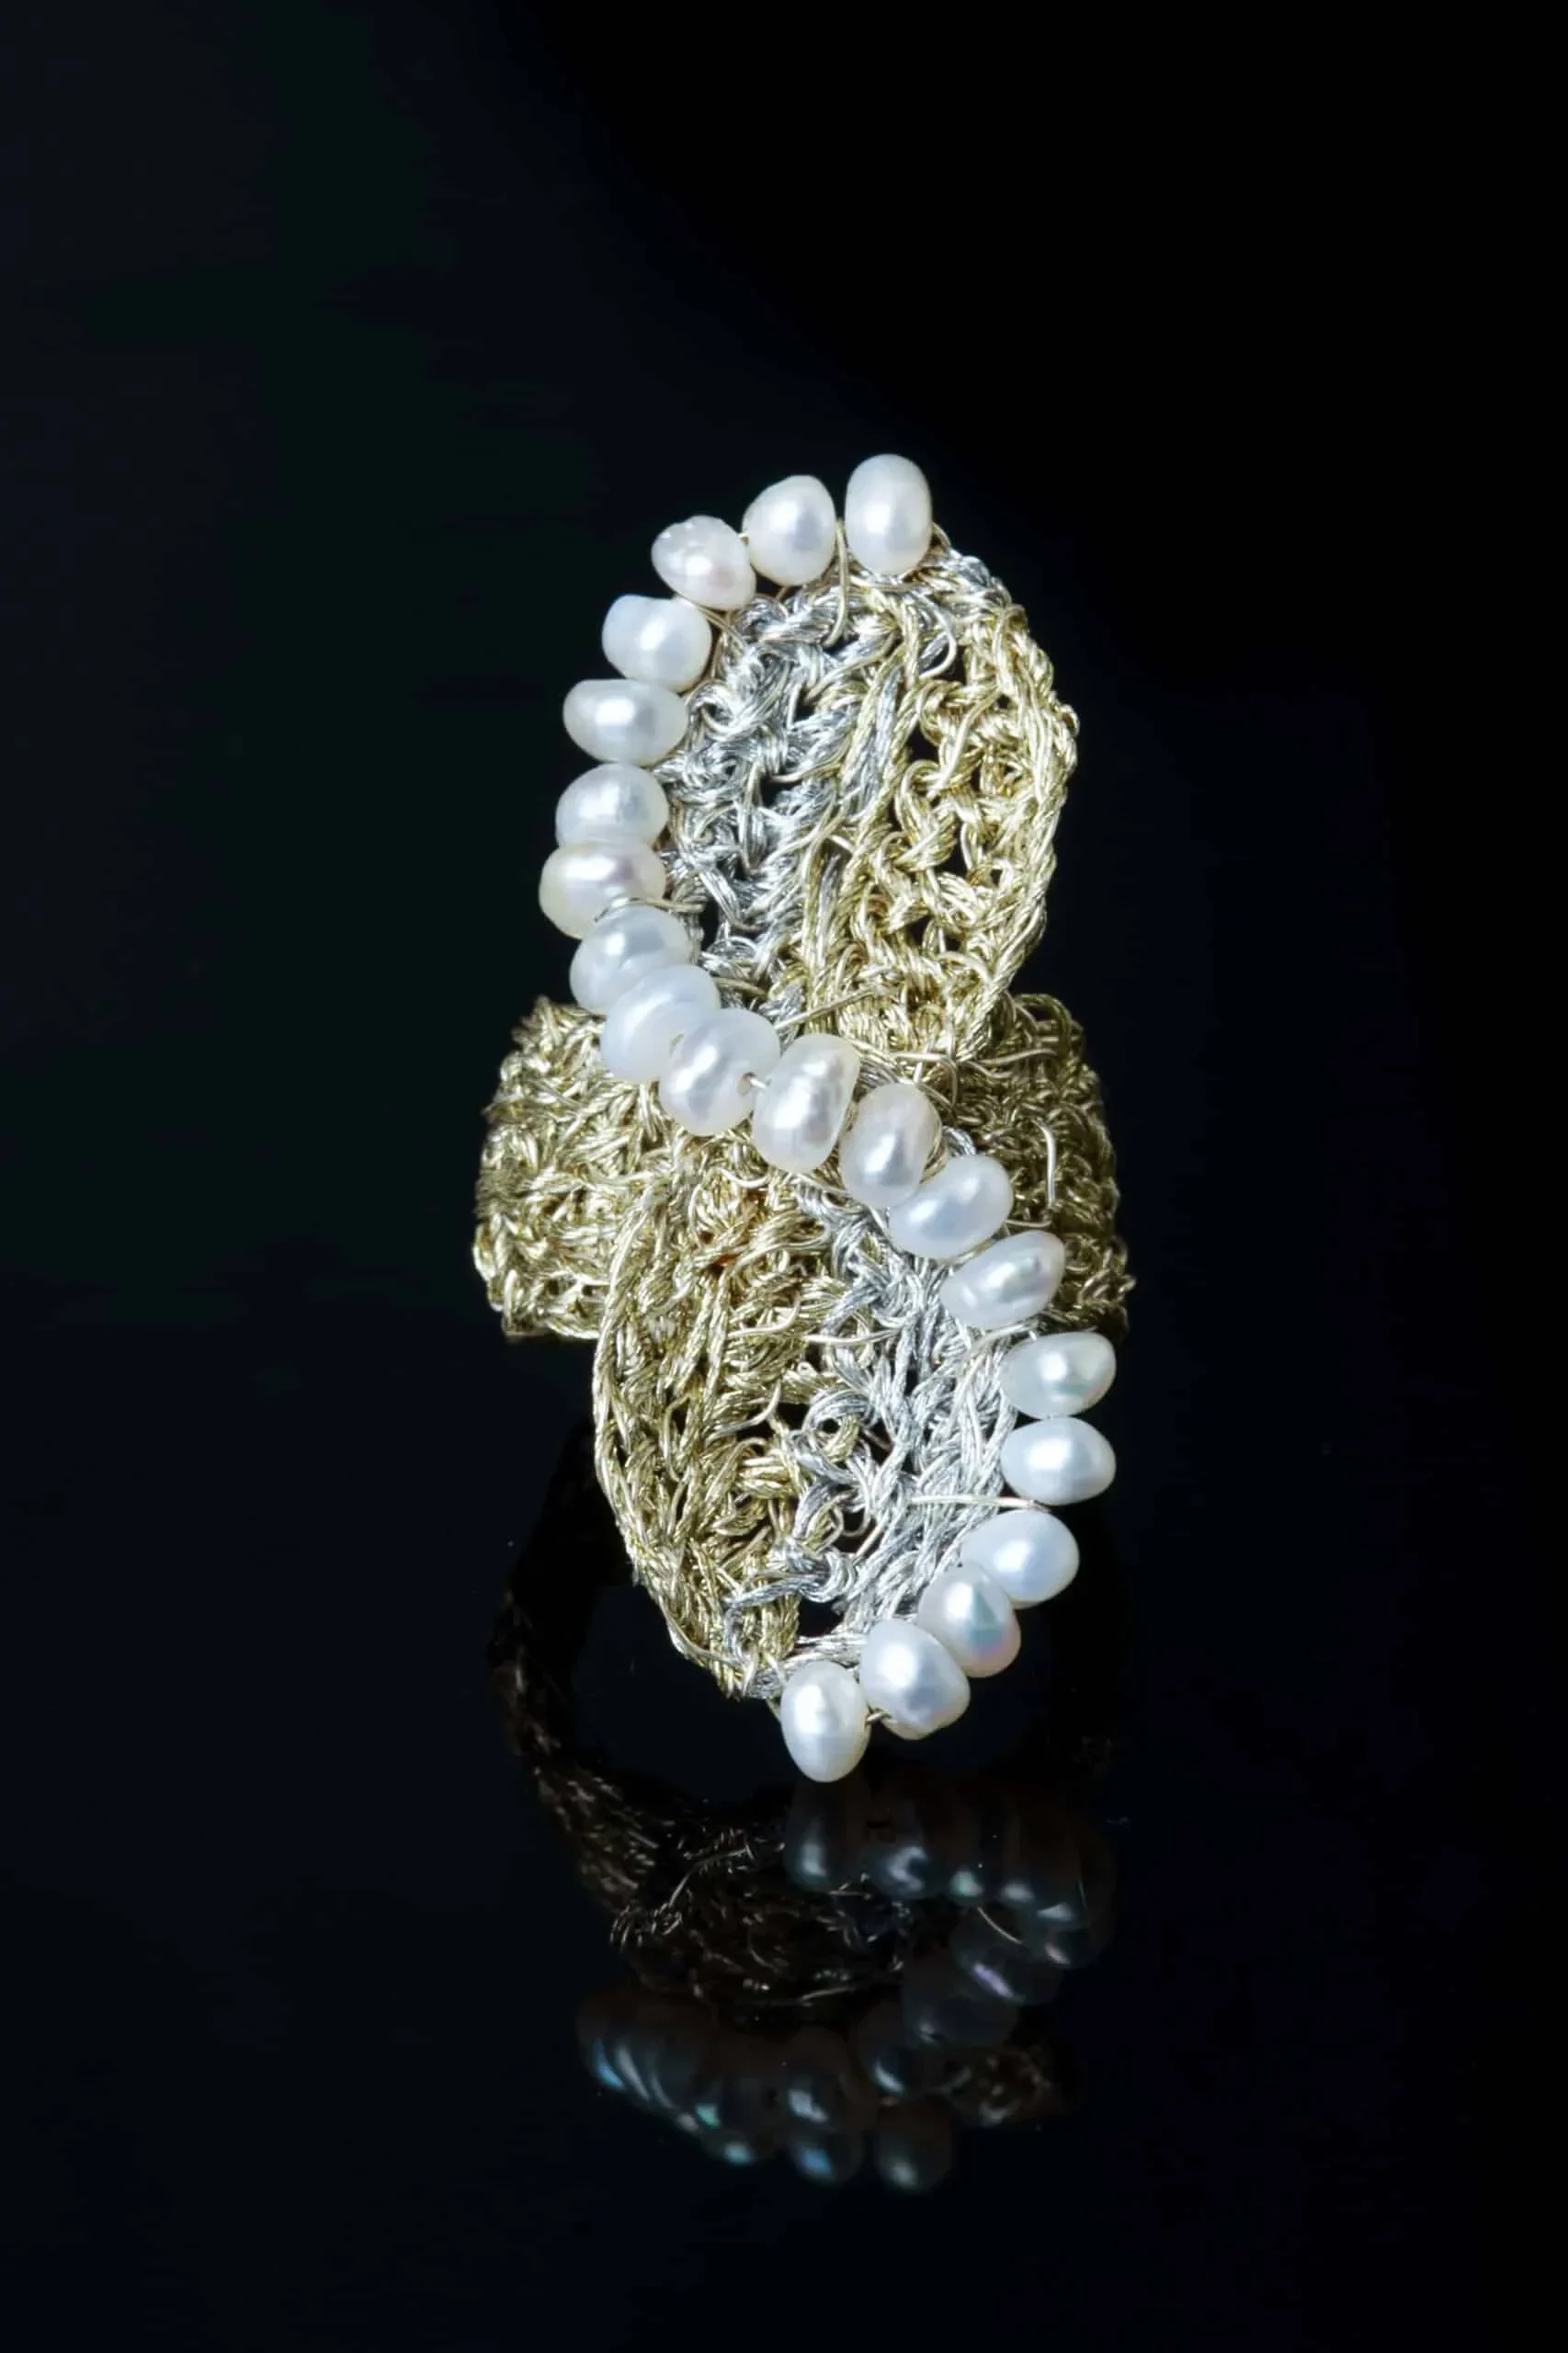 Handmade Jewellery | Crochet knit silver ring with pearls gallery 1